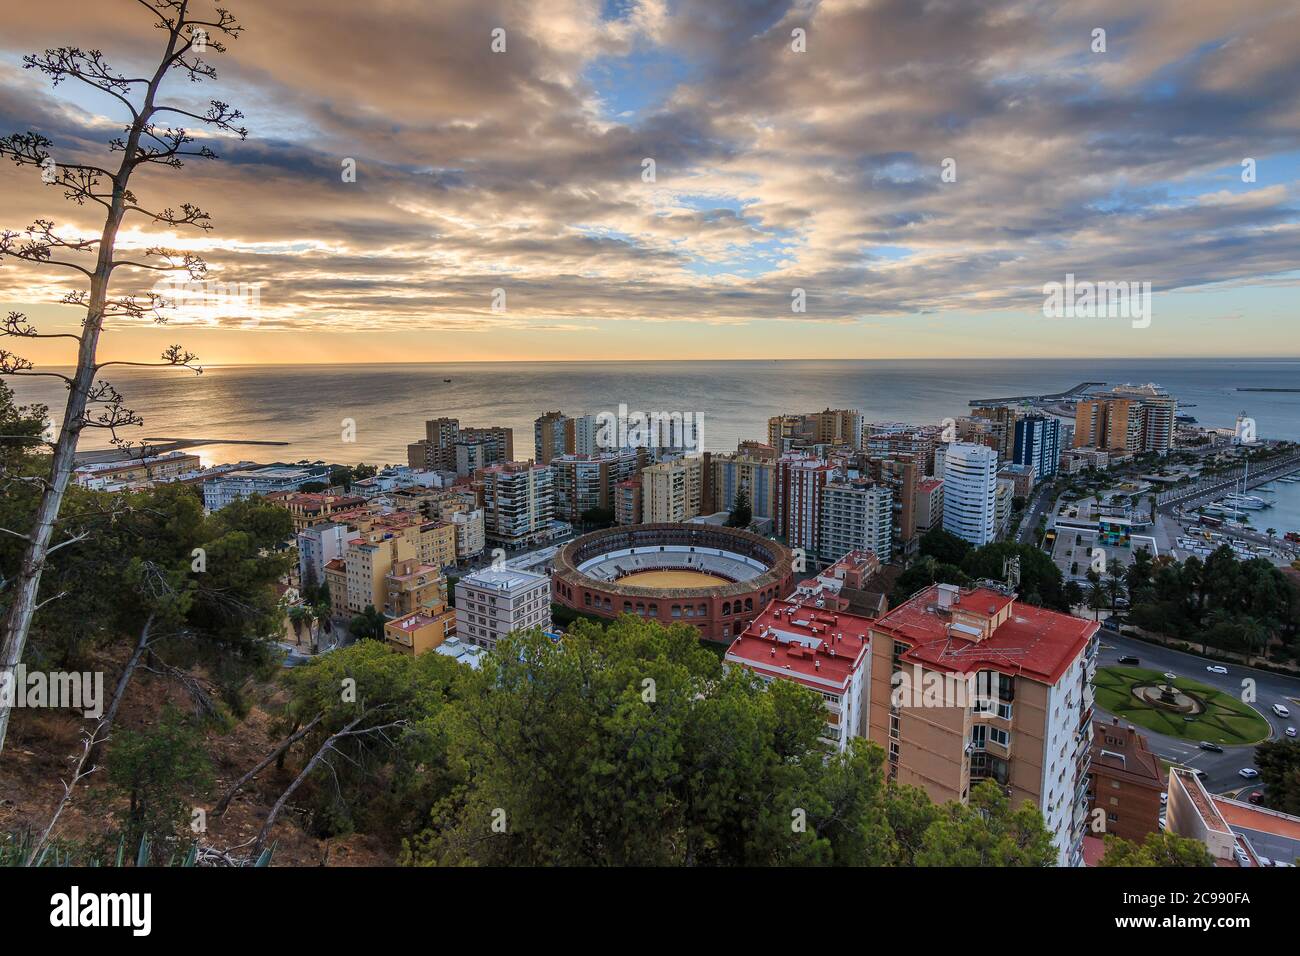 Spanish coast in Andalusia in the morning. View over the city of Malaga at sunrise with clouds and an orange horizon. City view on the Costa del Sol f Stock Photo